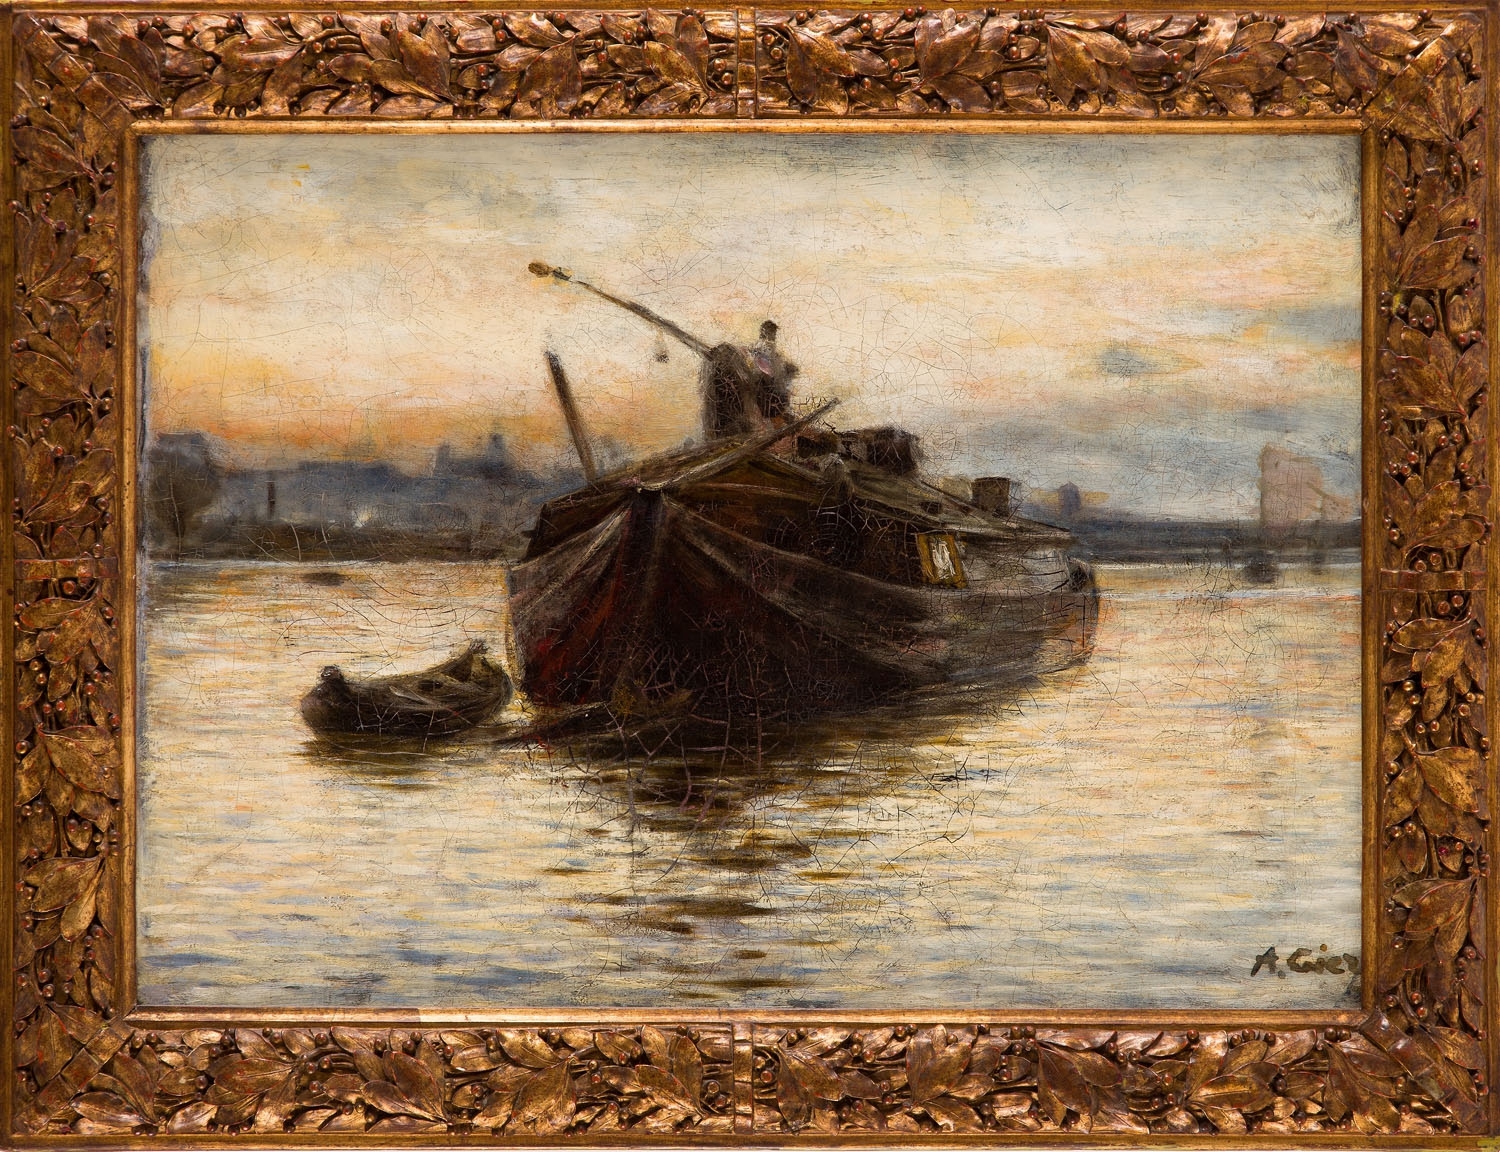 Artwork by Aleksander Gierymski, "From the Vistula Bank" ("A Barge on the river"), Made of oil/canvas